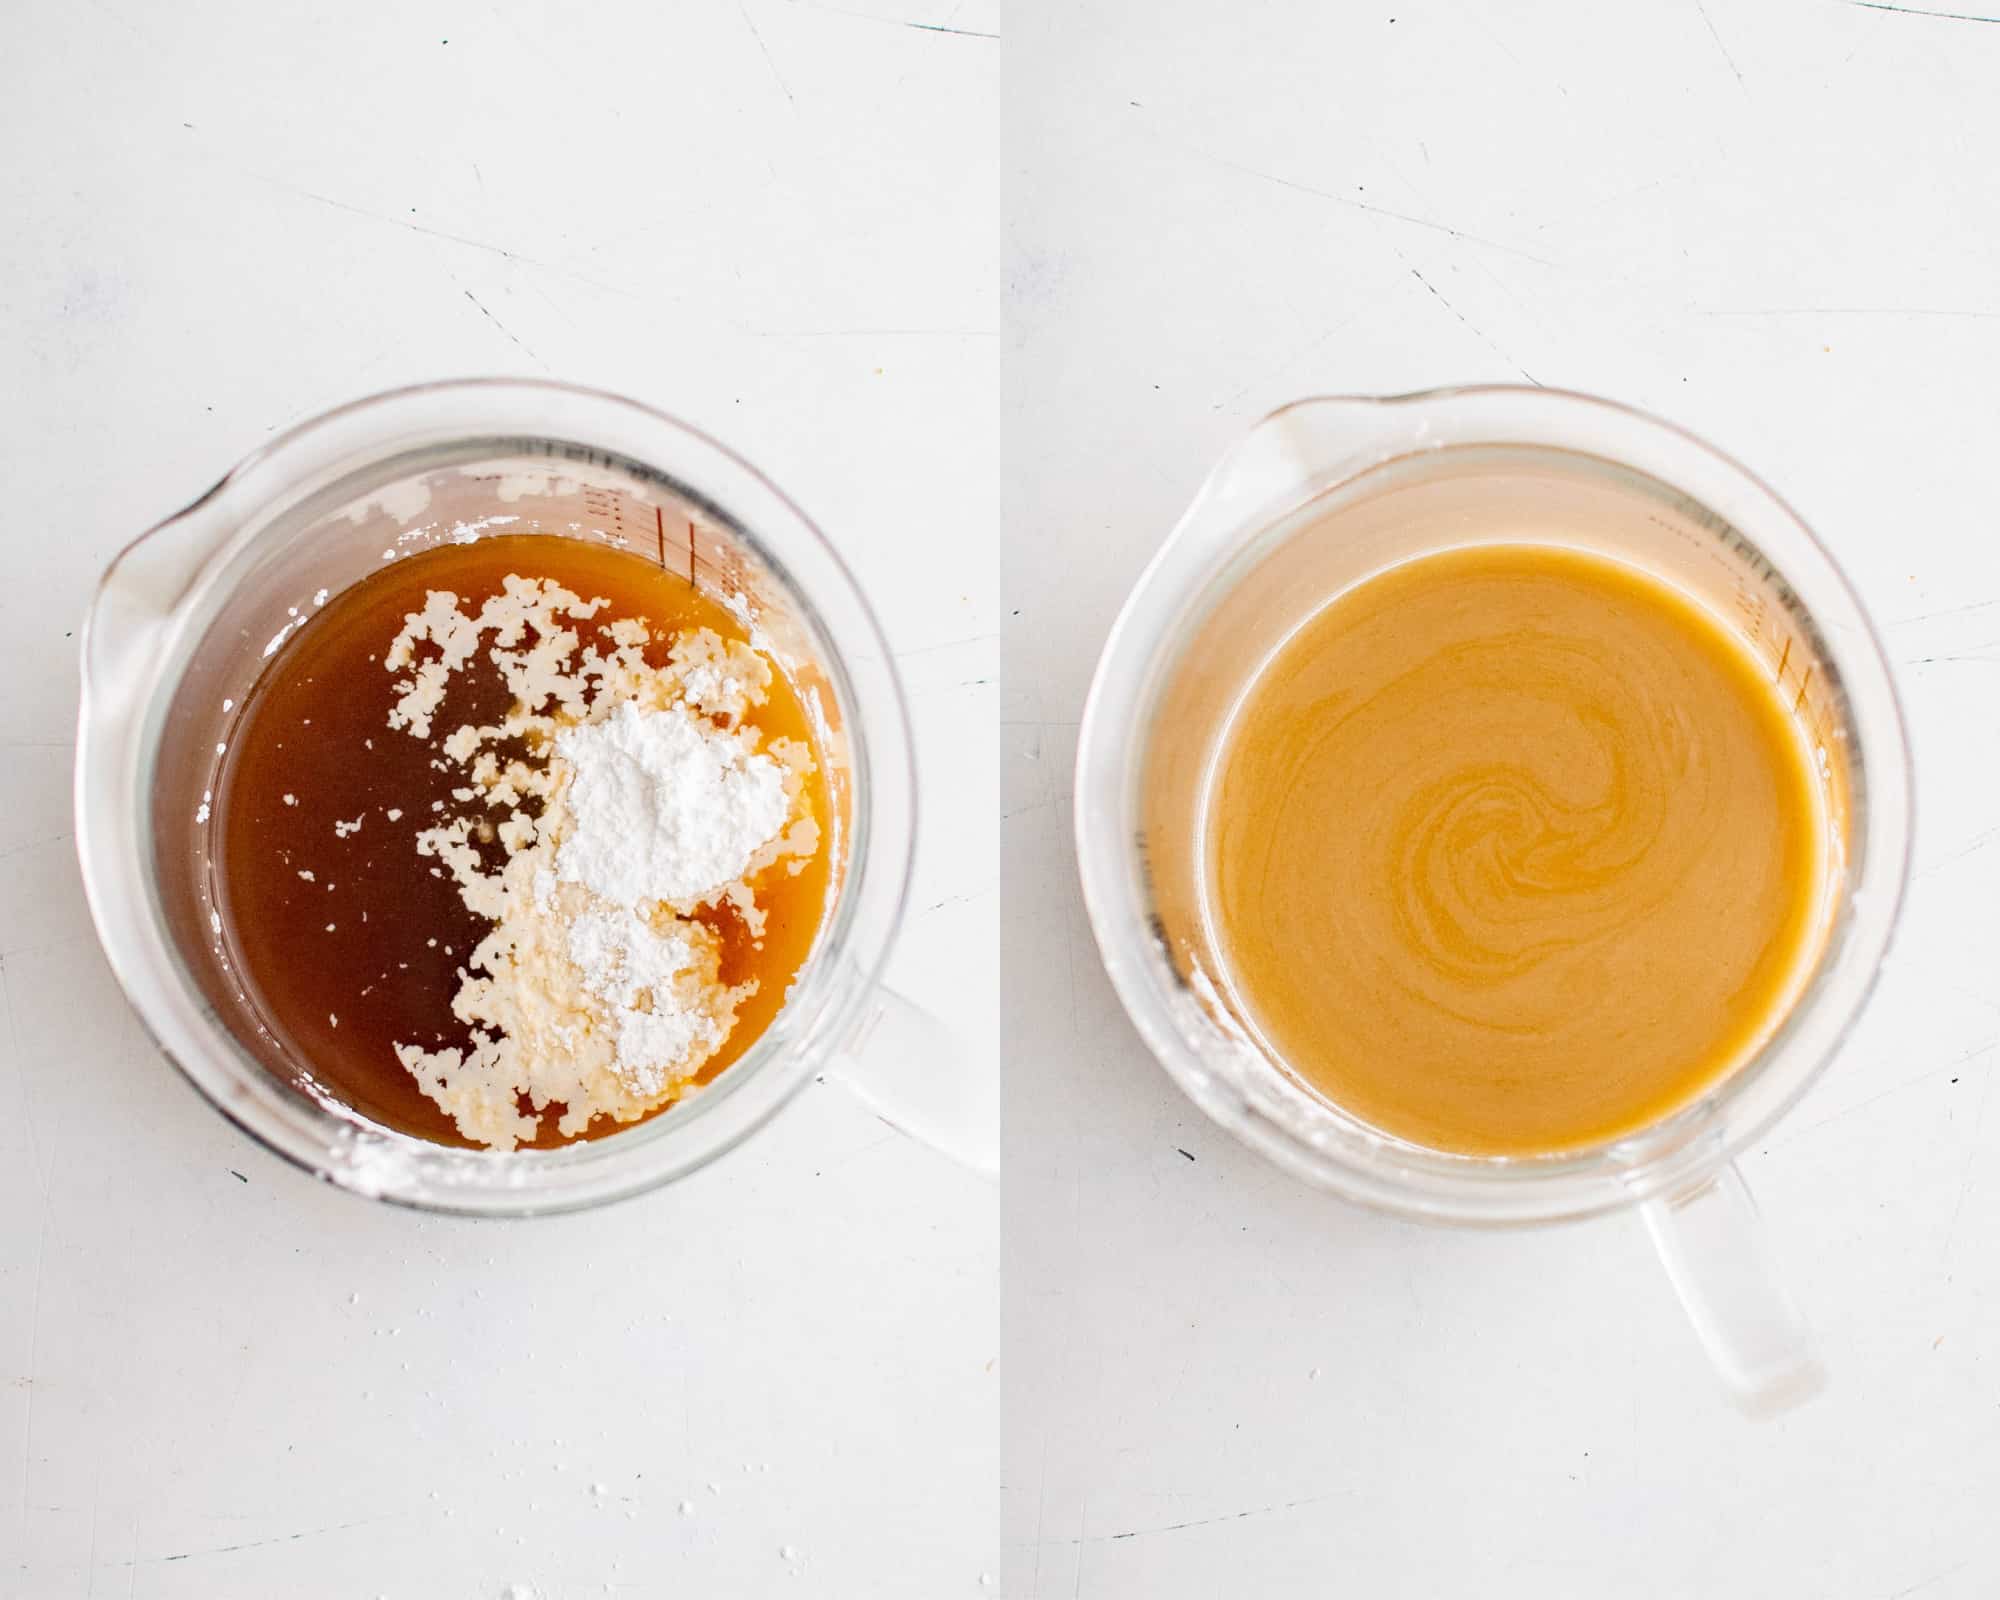 Two images side-by-side. The first image shows a small bowl with beef broth and cornstarch, the second image shows beef broth and cornstarch mixed together to make a cornstarch slurry.